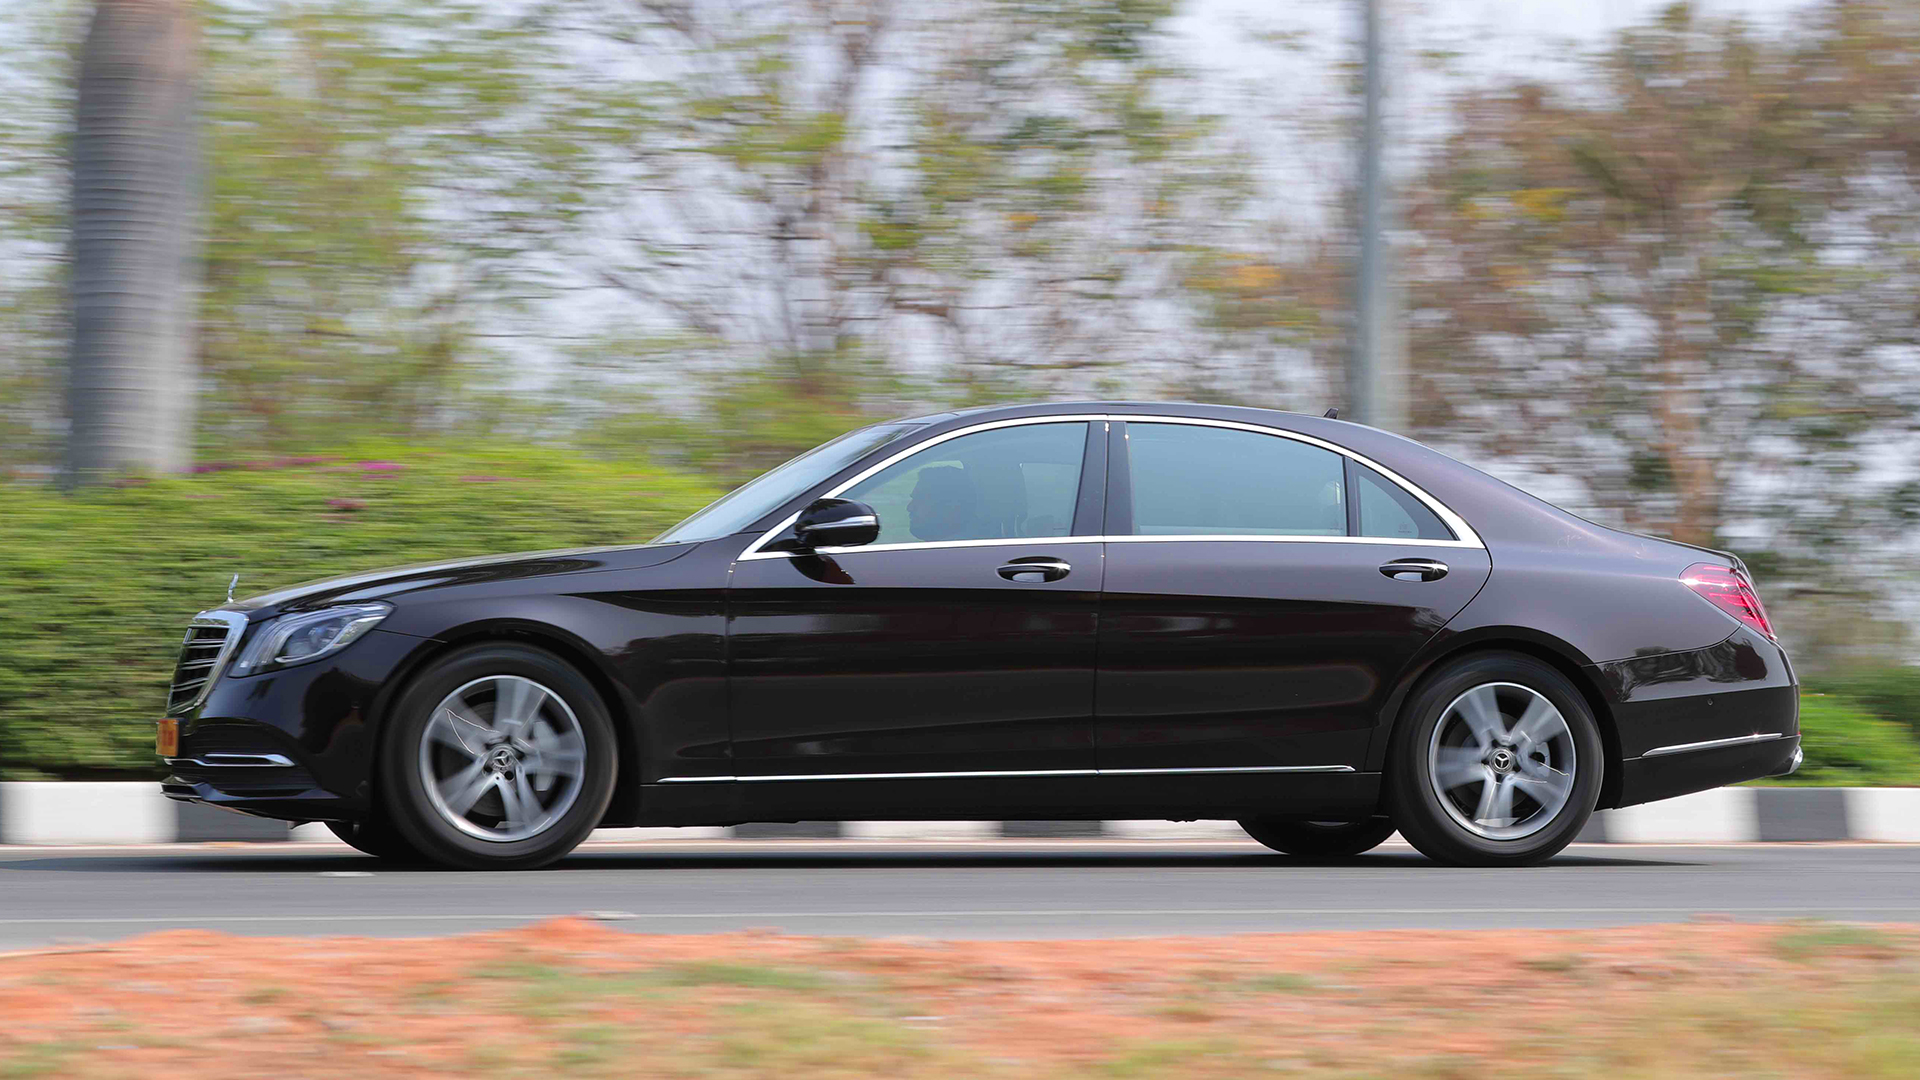 Mercedes-Benz S-Class 2021 S 350d 4MATIC - Price in India, Mileage,  Reviews, Colours, Specification, Images - Overdrive